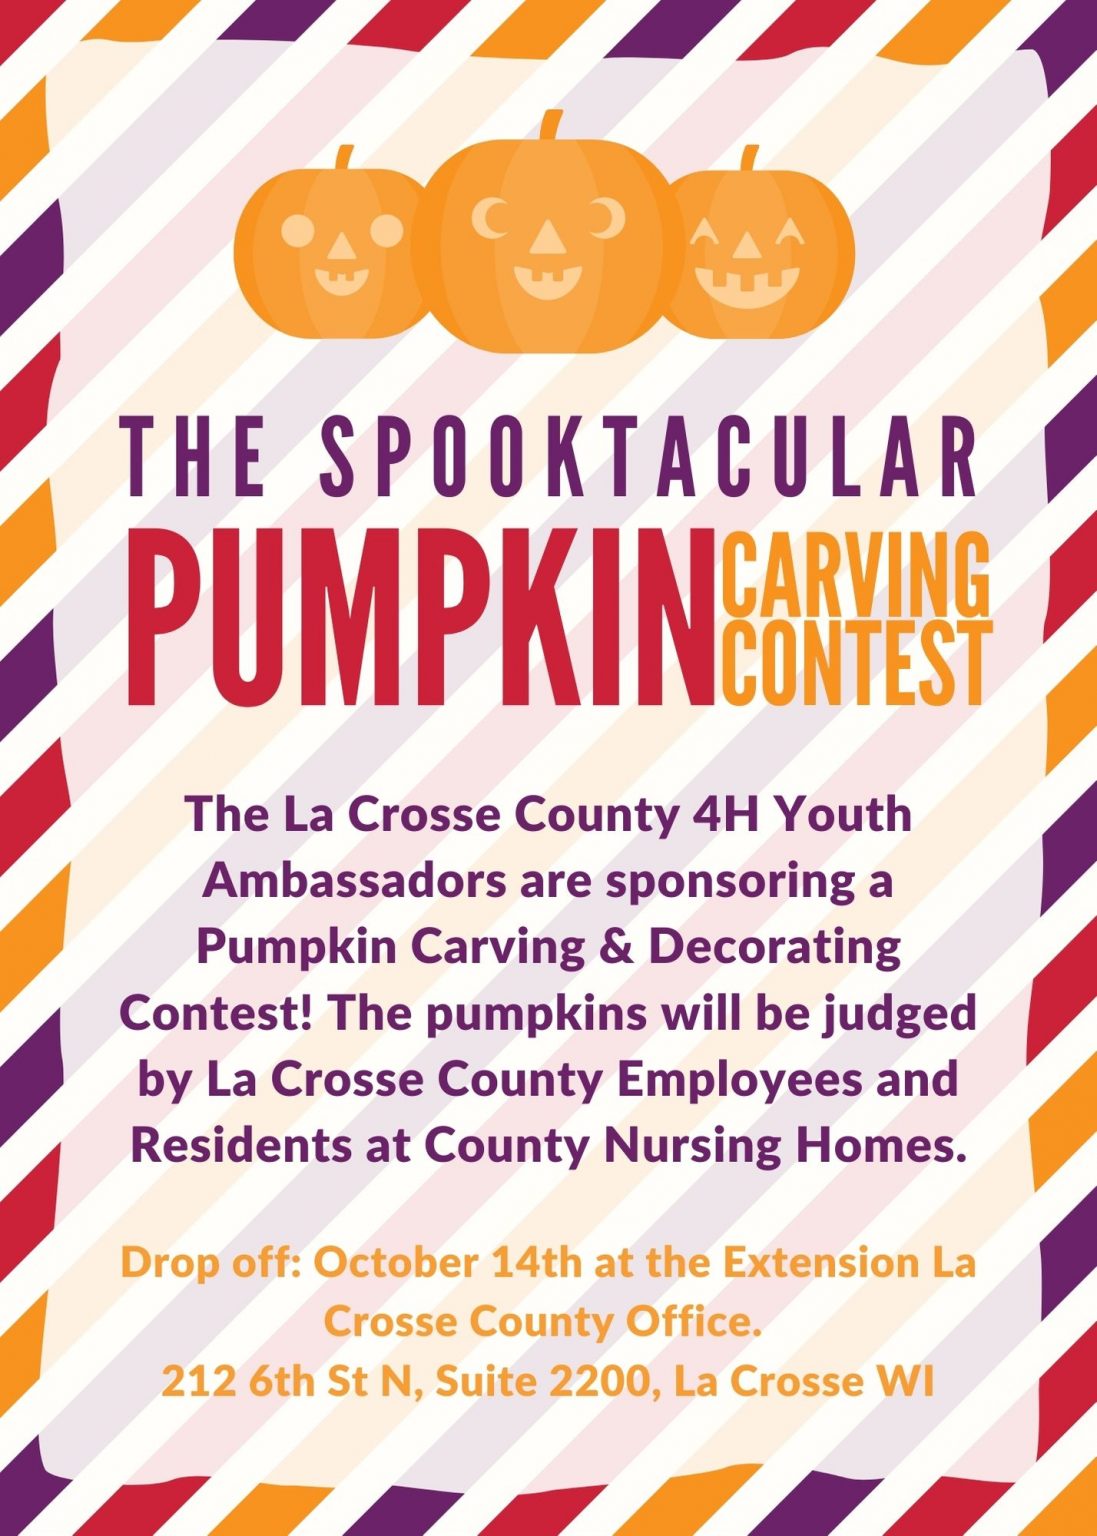 4-h-pumpkin-carving-and-decorating-contest-extension-la-crosse-county